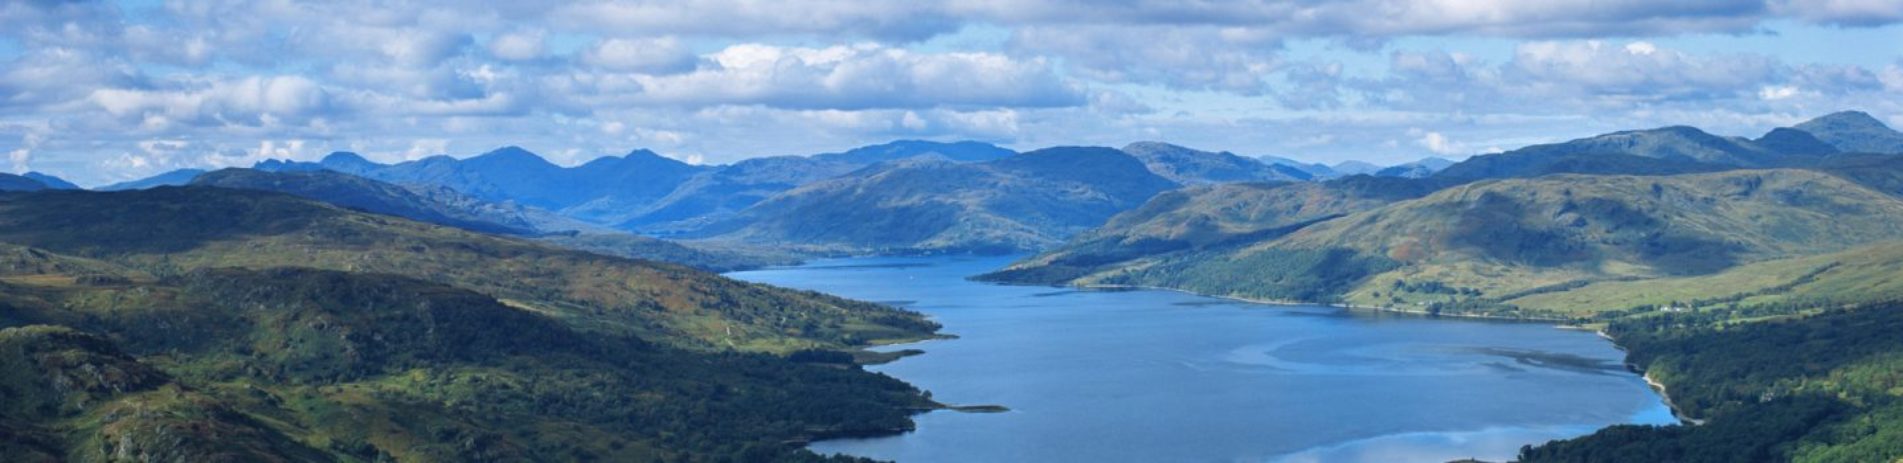 aerial-view-of-loch-clouds-and-mountains